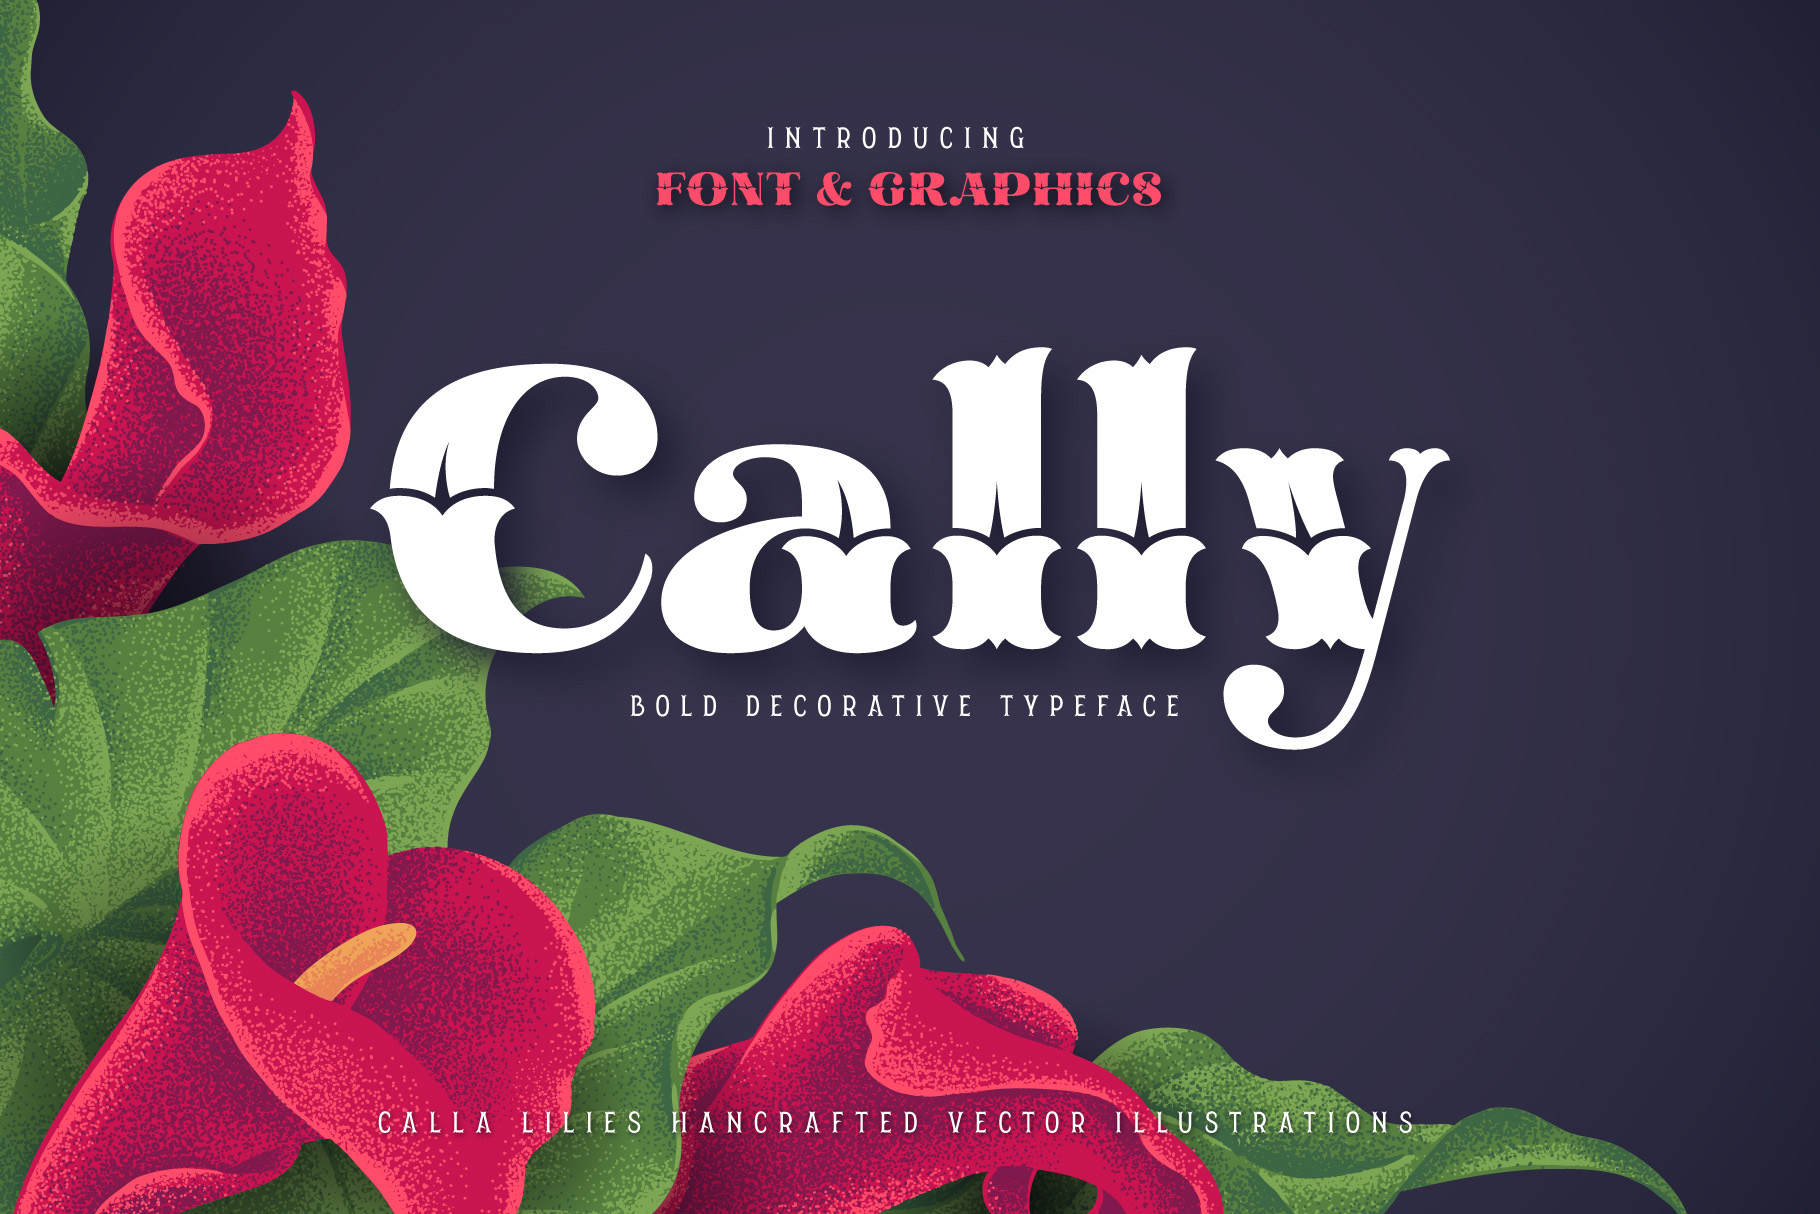 Cally Font & Graphics facebook image.